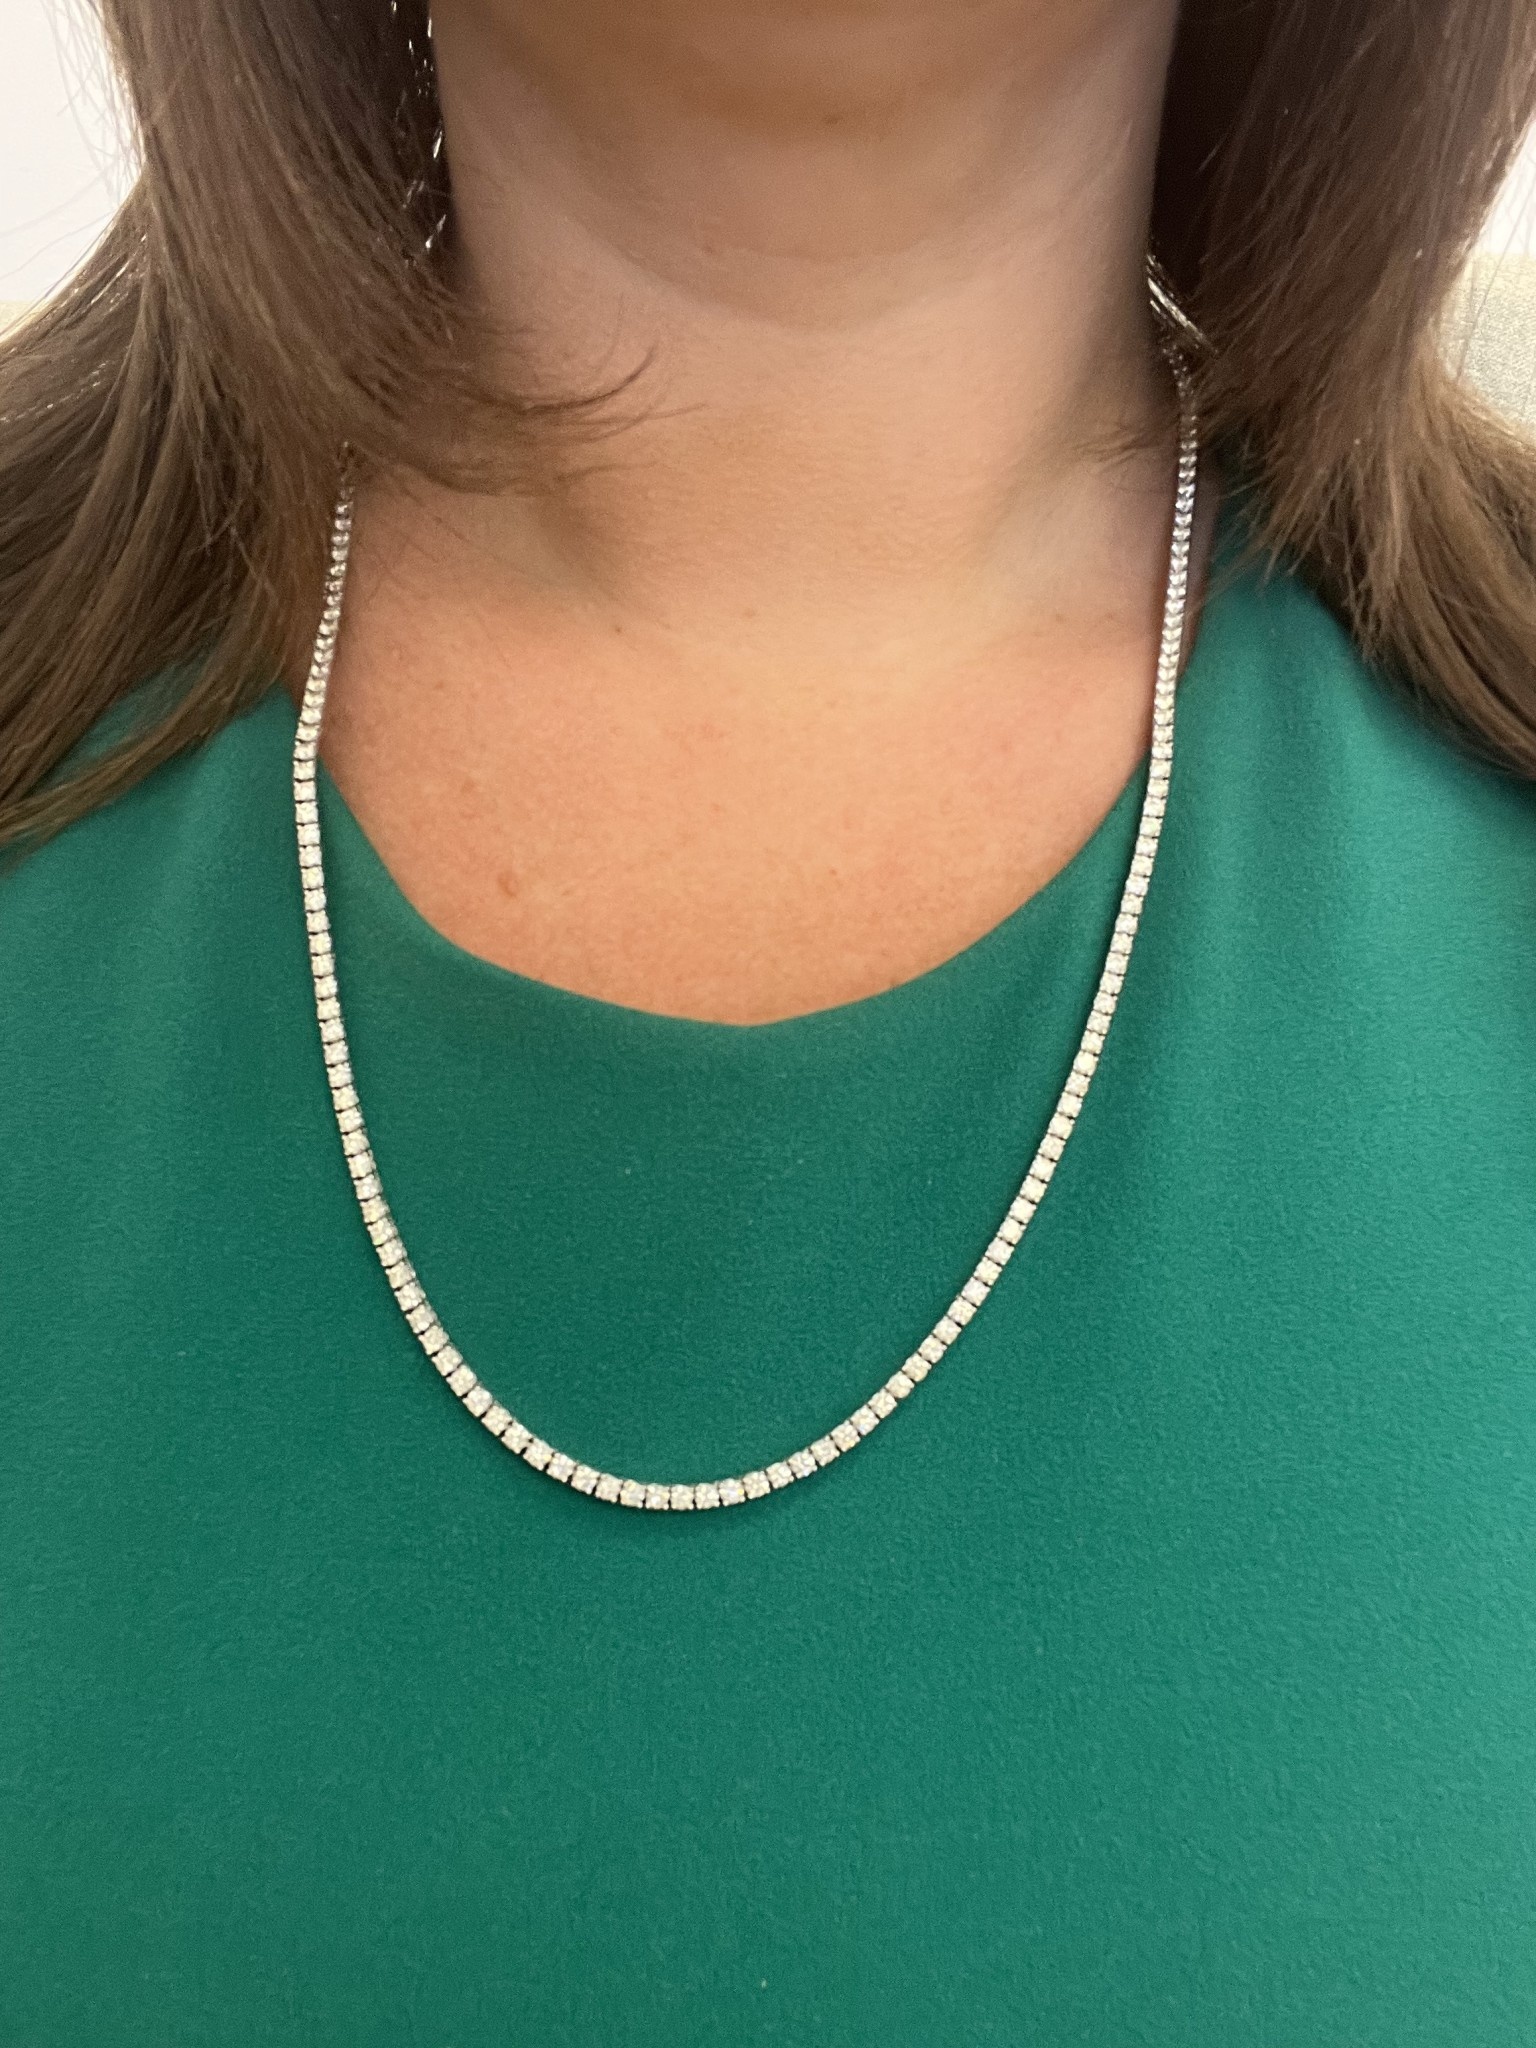 Tennis Necklace with a Teardrop Emerald – Sioro Jewelry